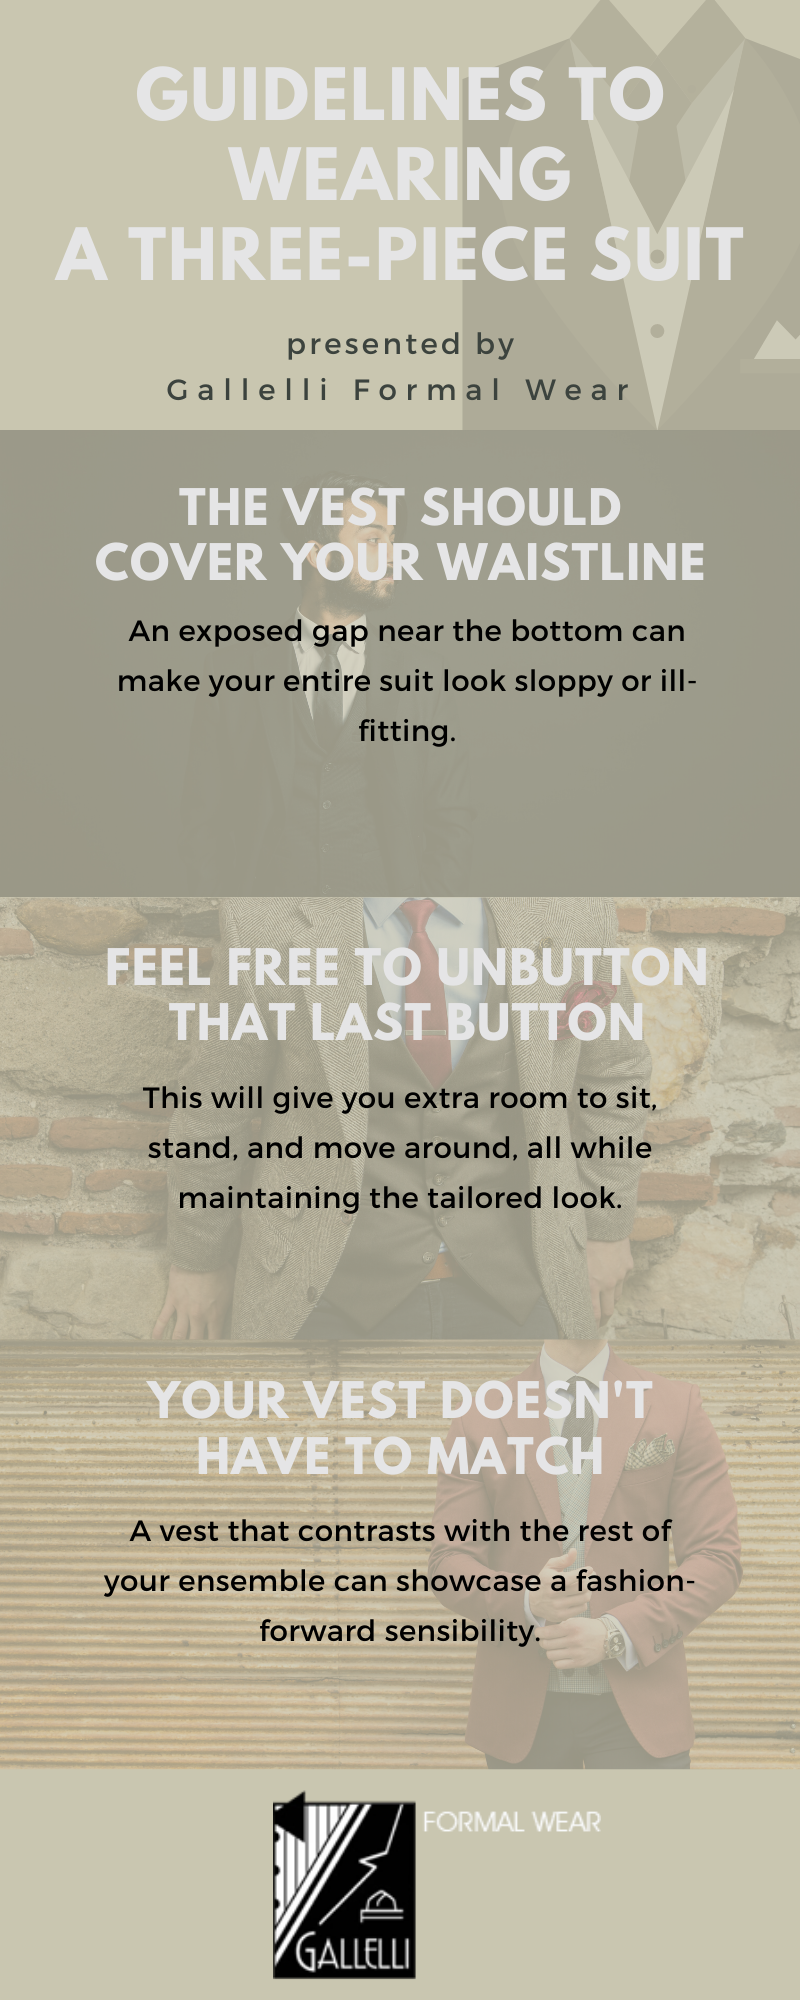 Infographic explaining the guidelines to wearing a three-piece suit